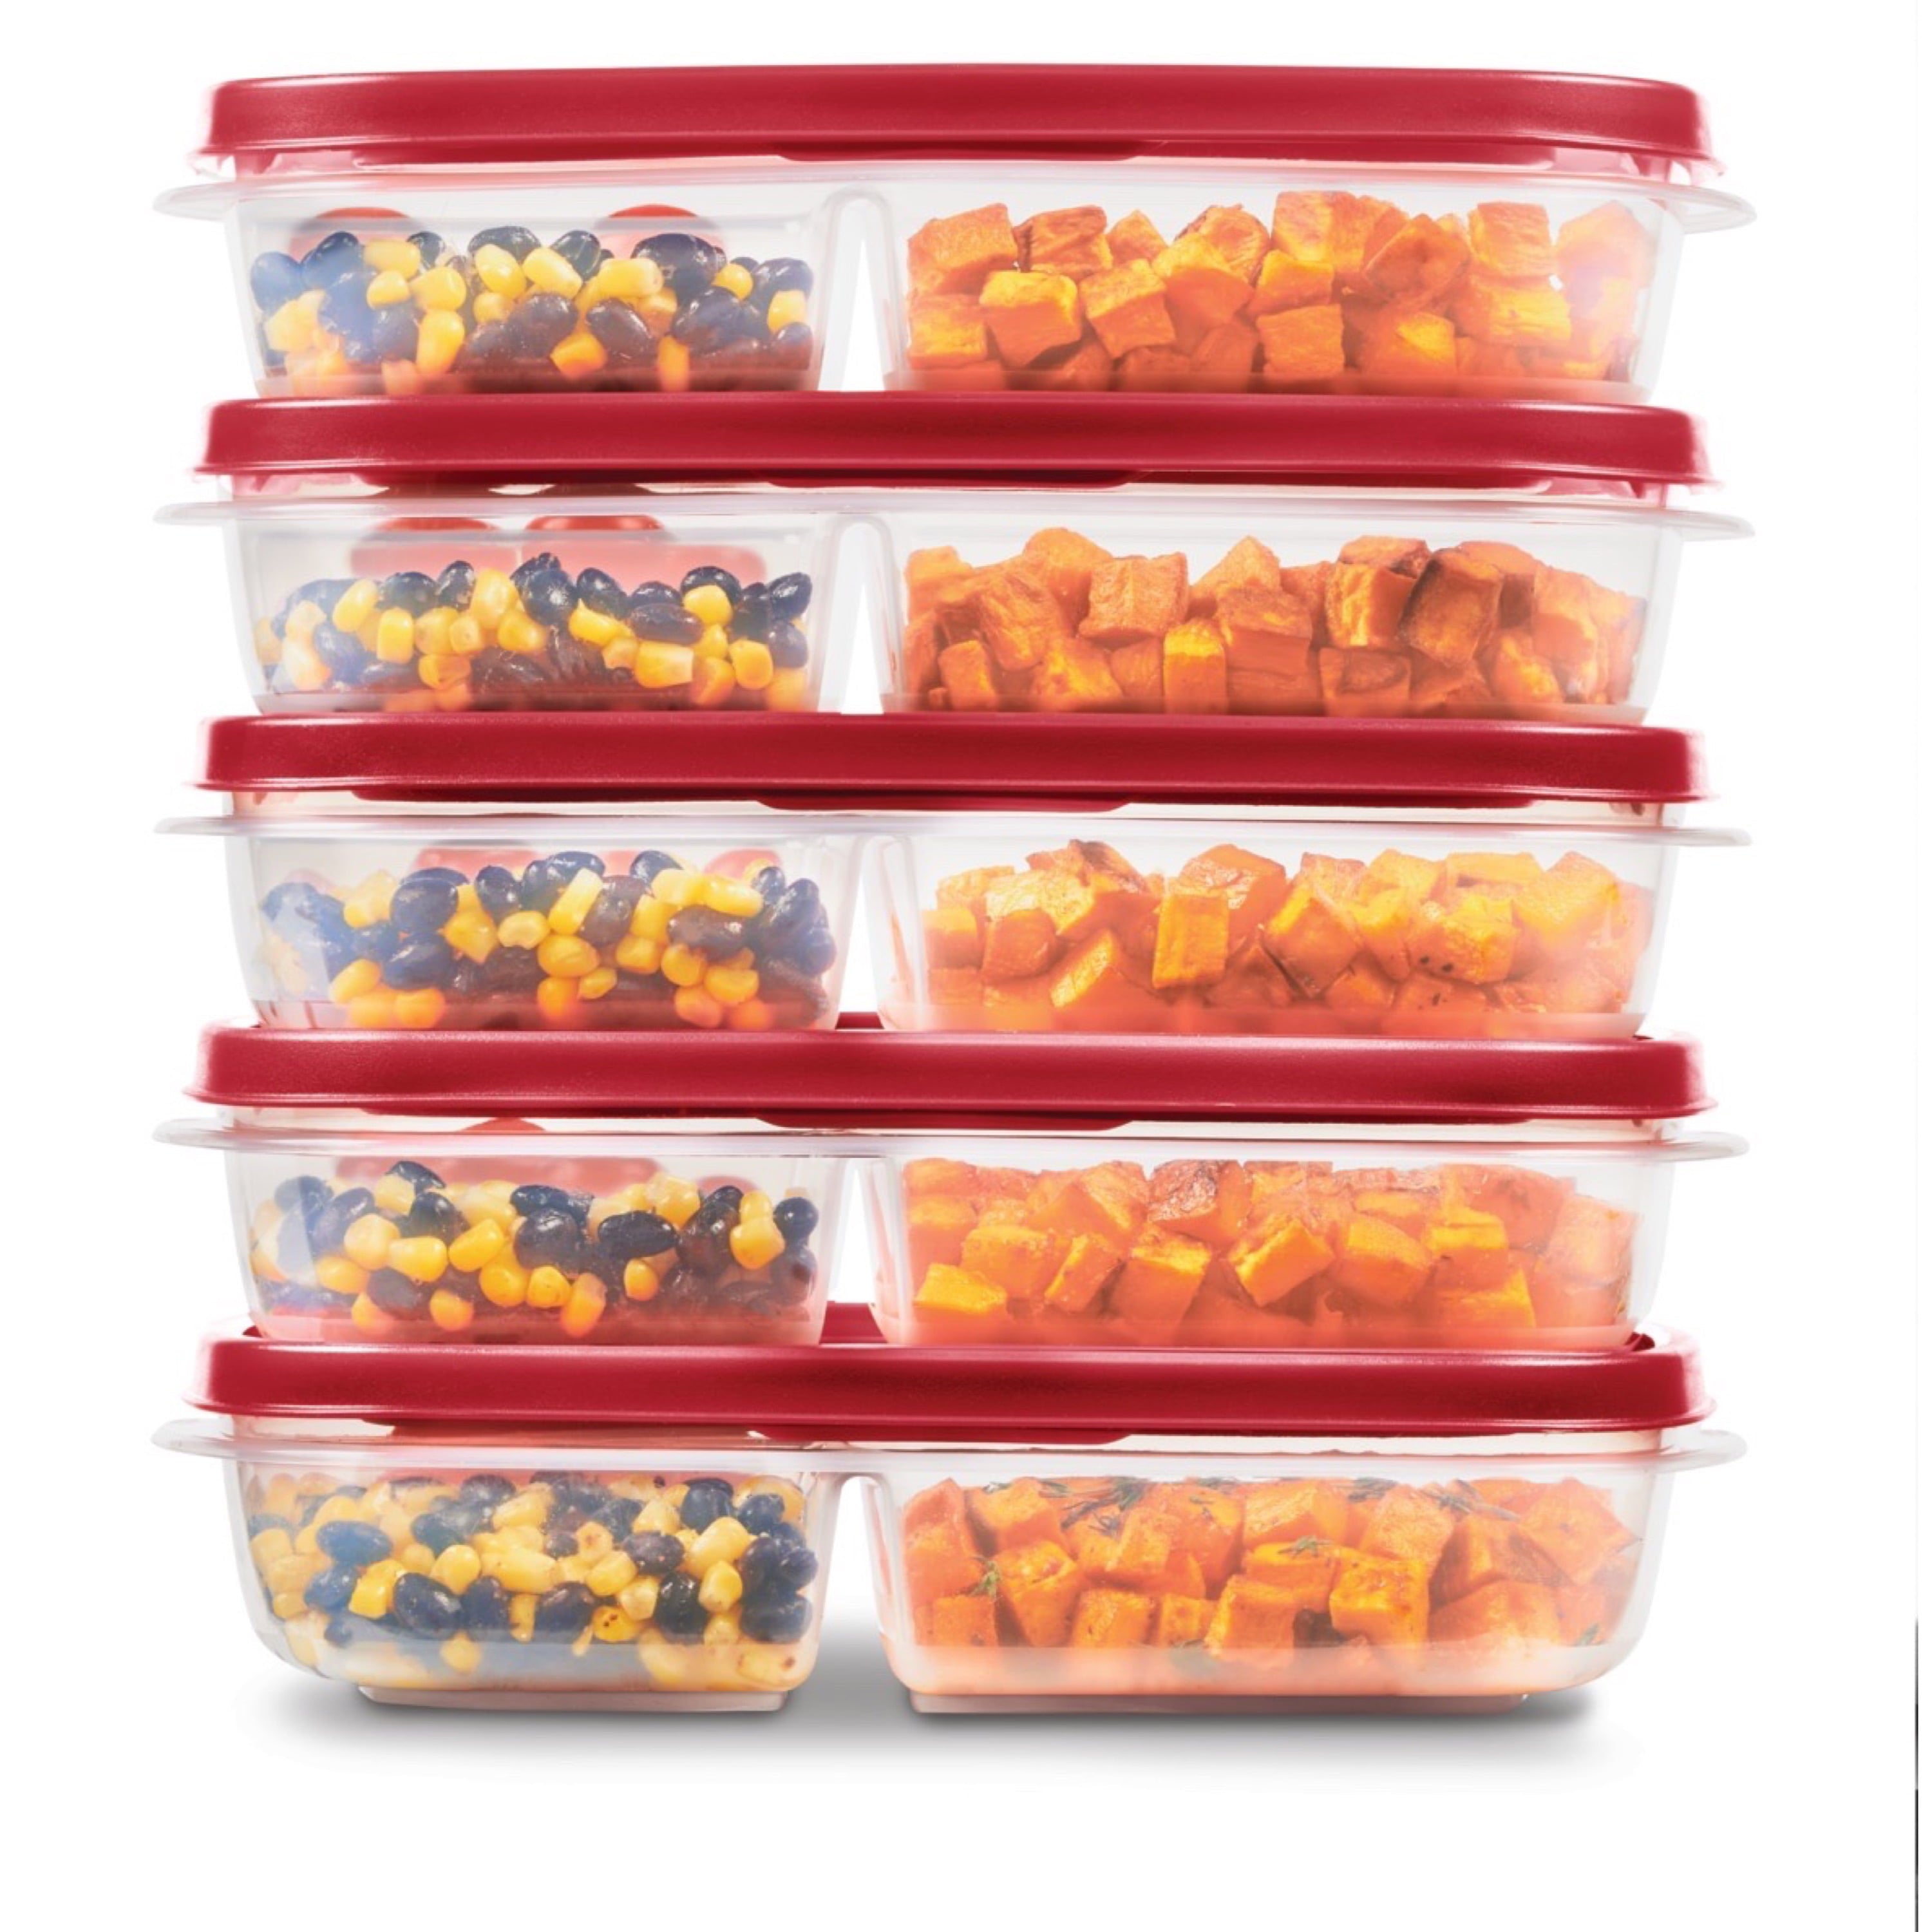 Rubbermaid Easy Find Lids 5 Pack Meal Prep Containers with 3 Compartments, Red, 5.1 Cups